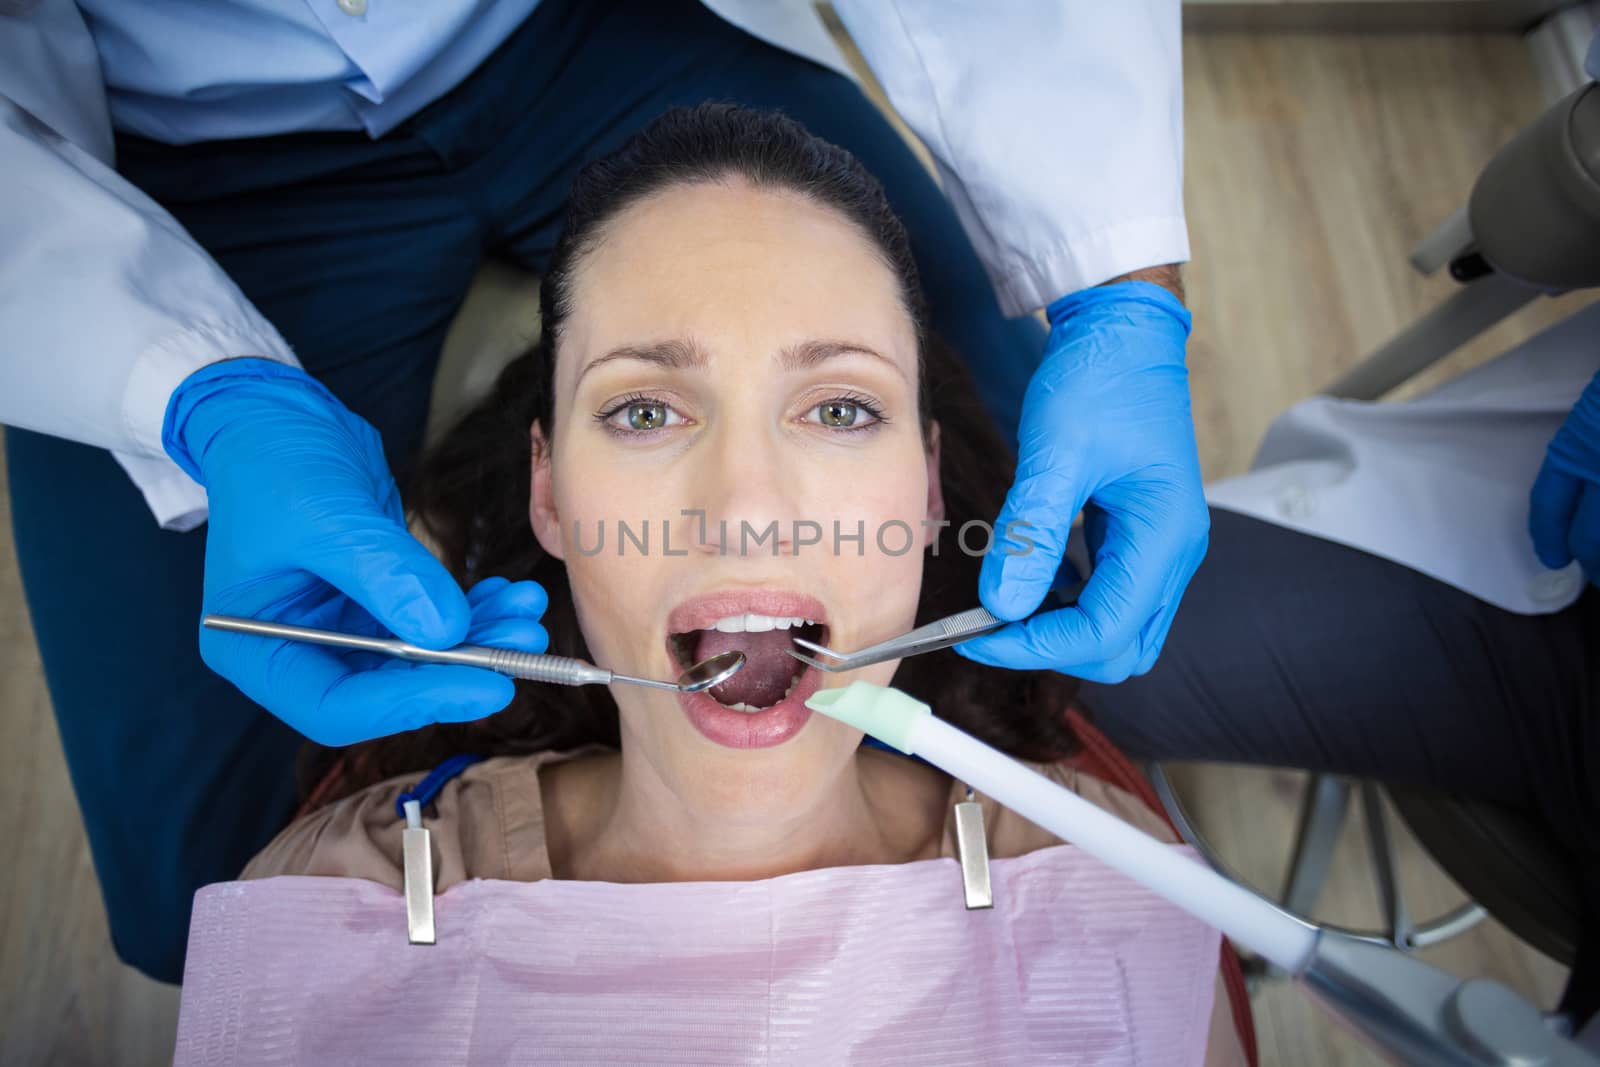 Dentist examining a female patient with tools at dental clinic